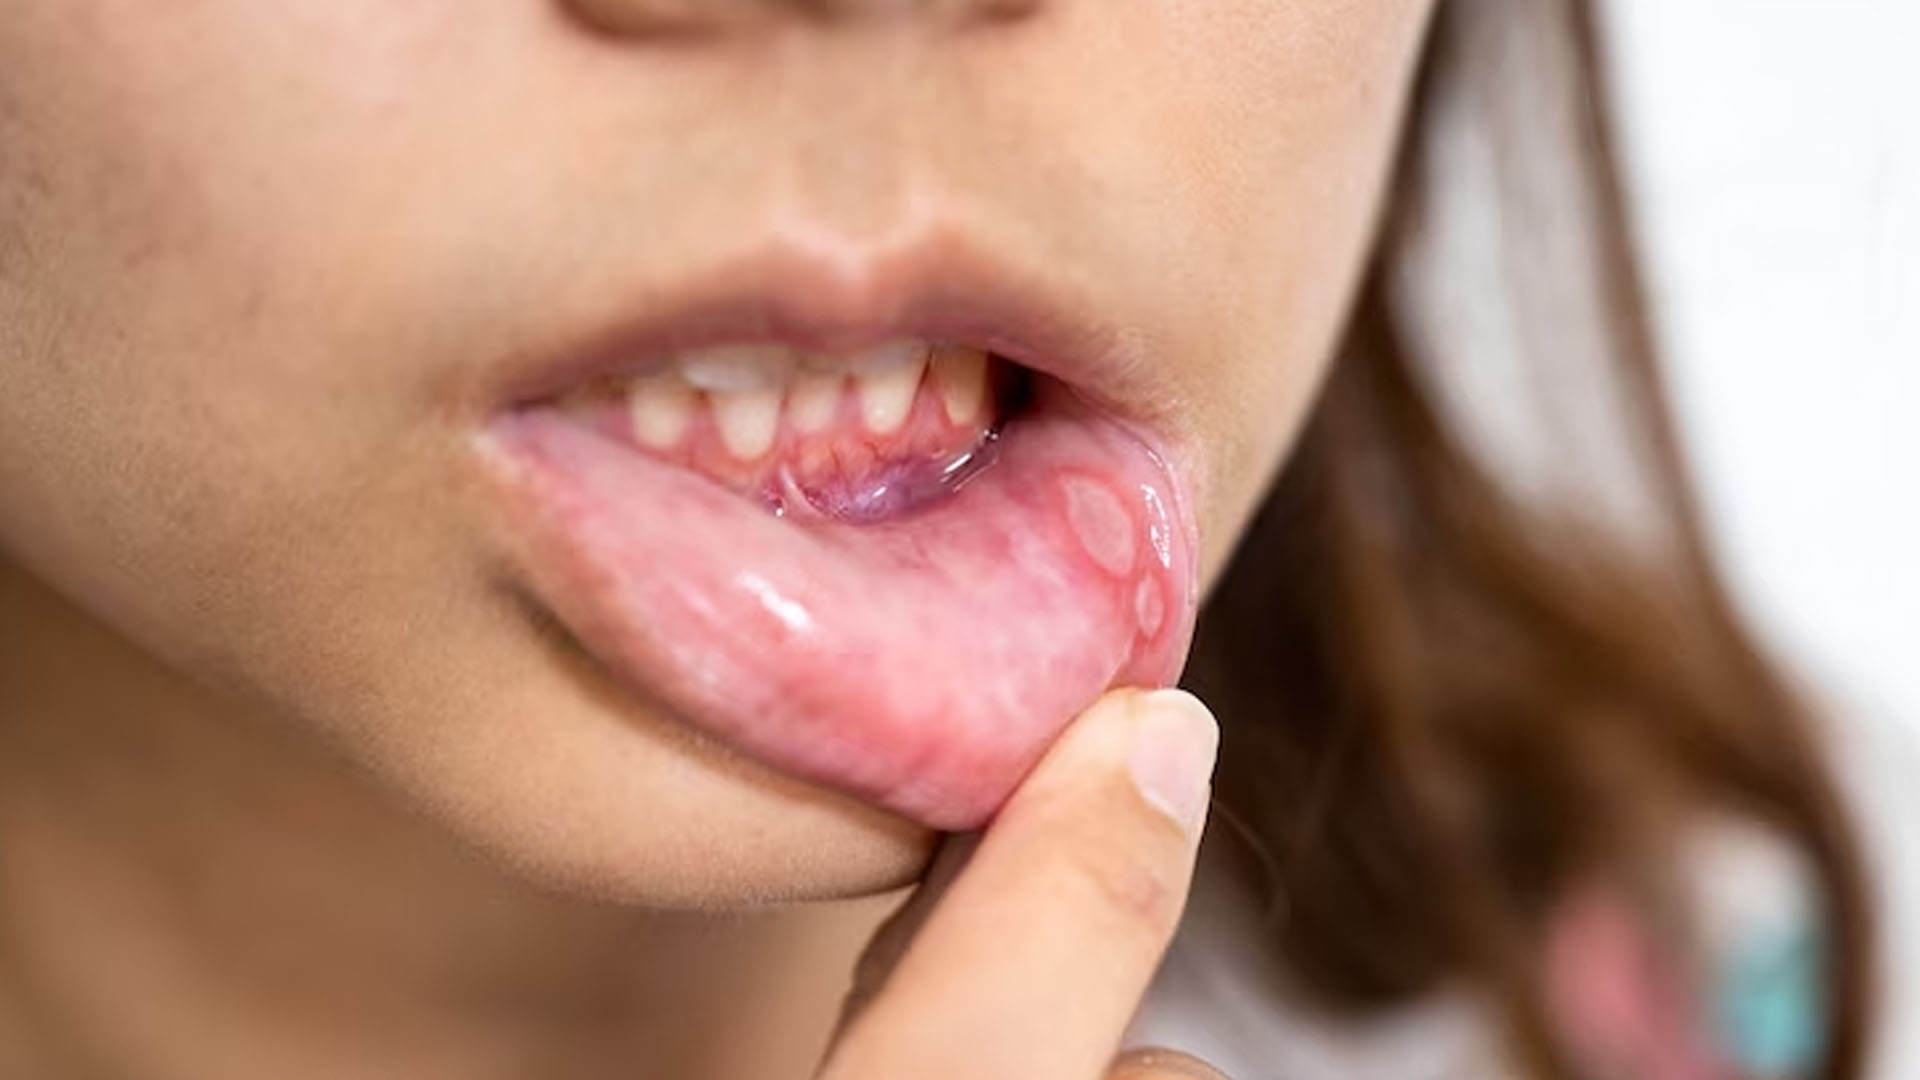 What are the Home Remedies for Mouth Blisters?